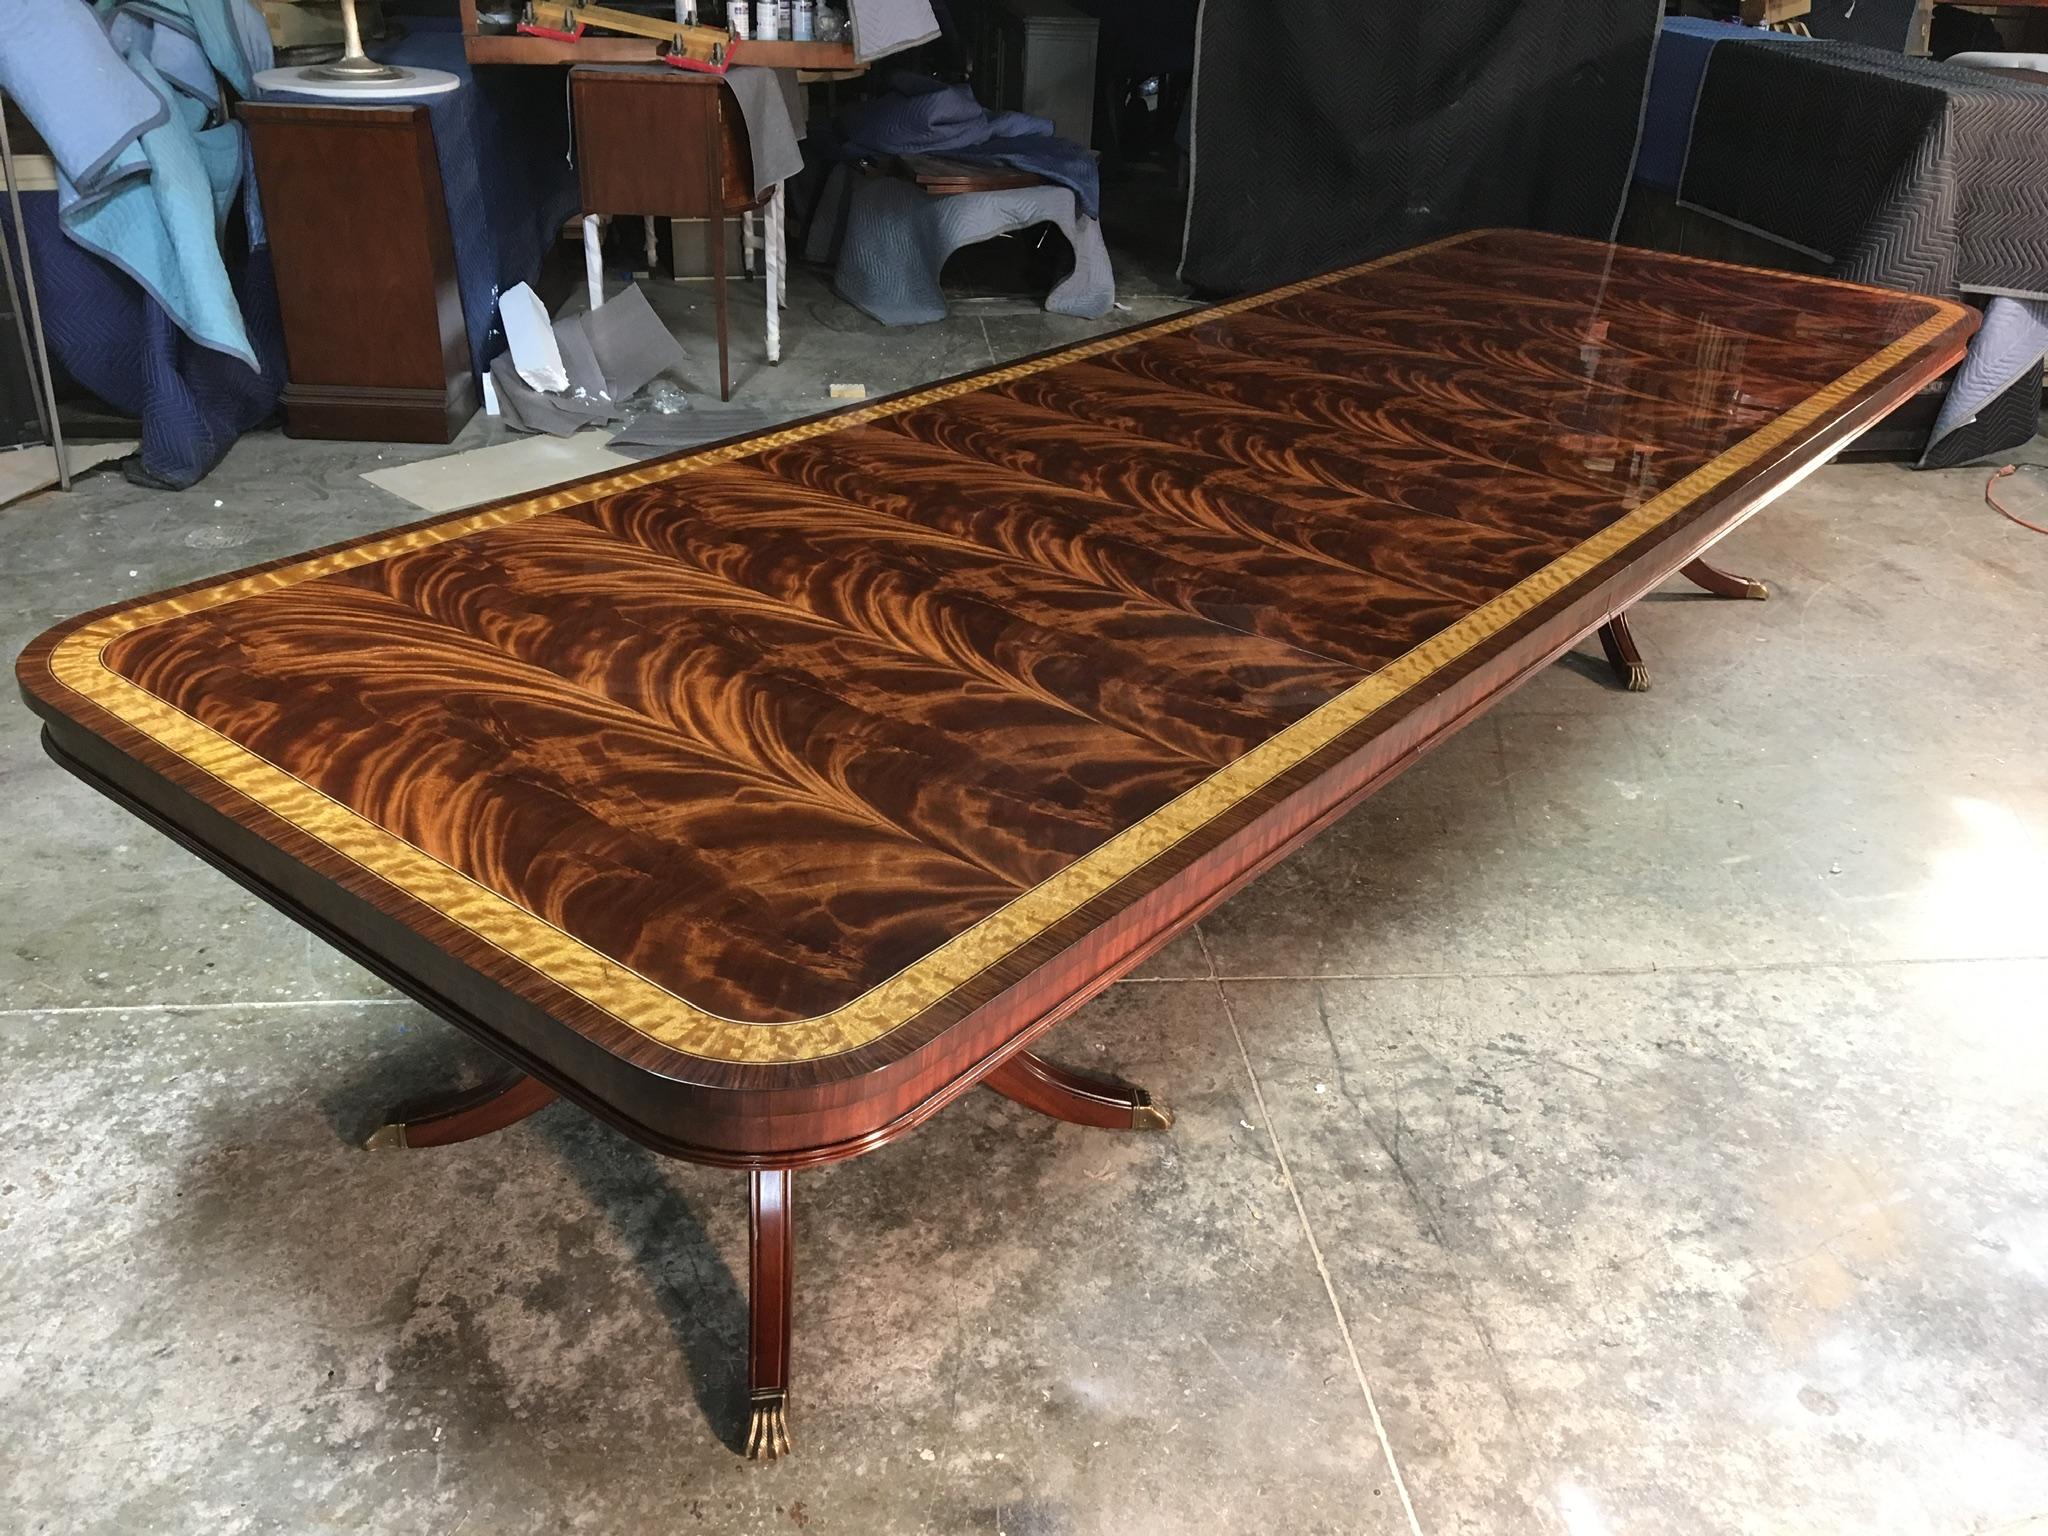 This is a made-to-order Large Traditional mahogany banquet/dining table made in the Leighton Hall shop. It features a field of slip-matched swirly crotch mahogany from west Africa and satinwood and santos rosewood borders from South America. It has